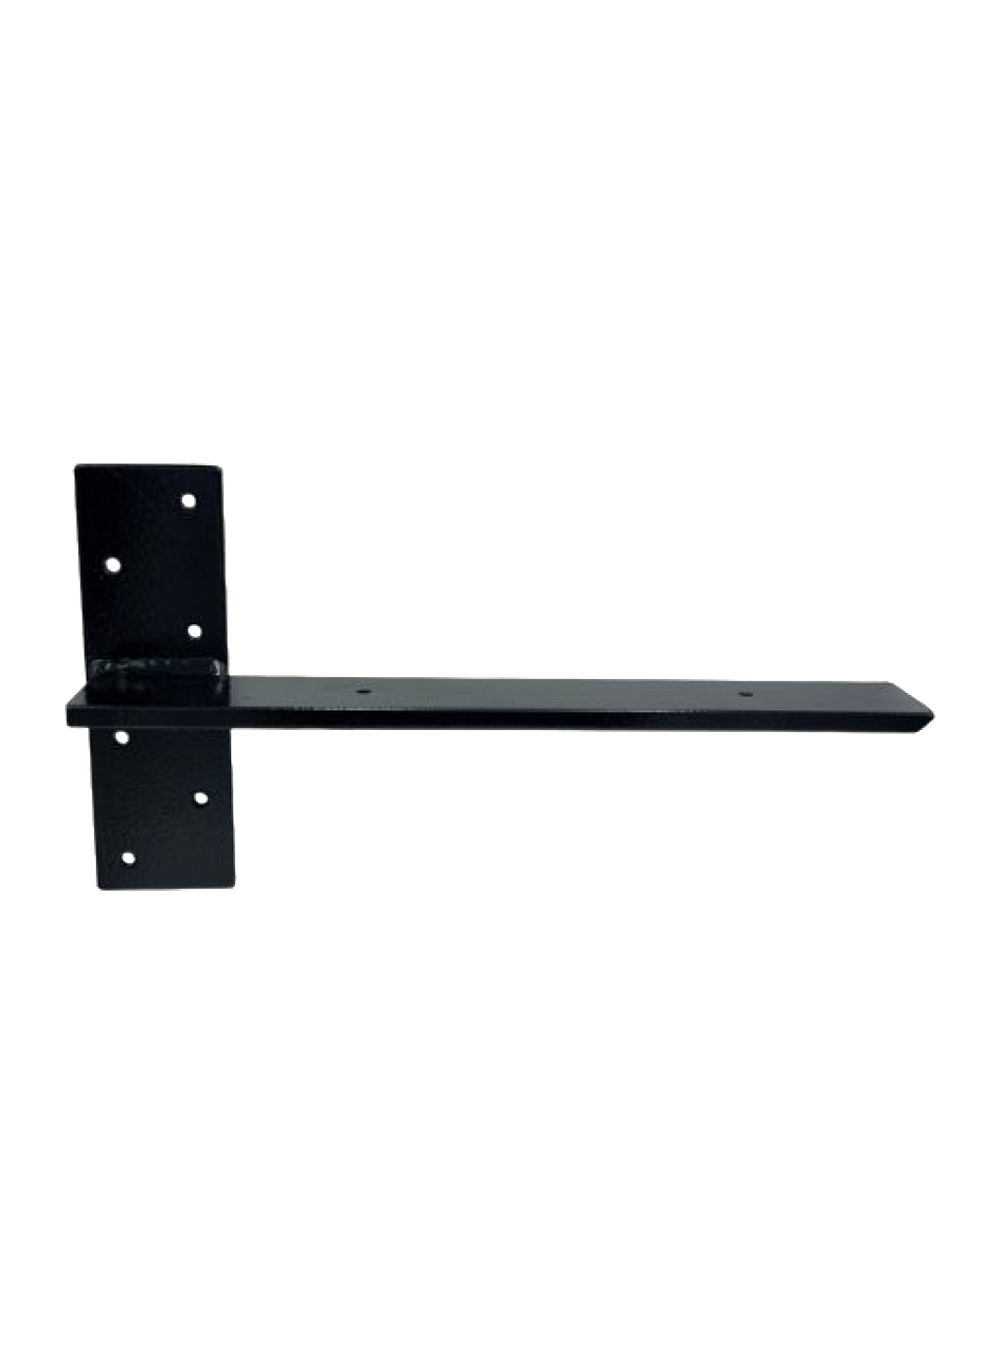 Do you have a bracket with a 1.75” mounting plate instead of 2.5”?